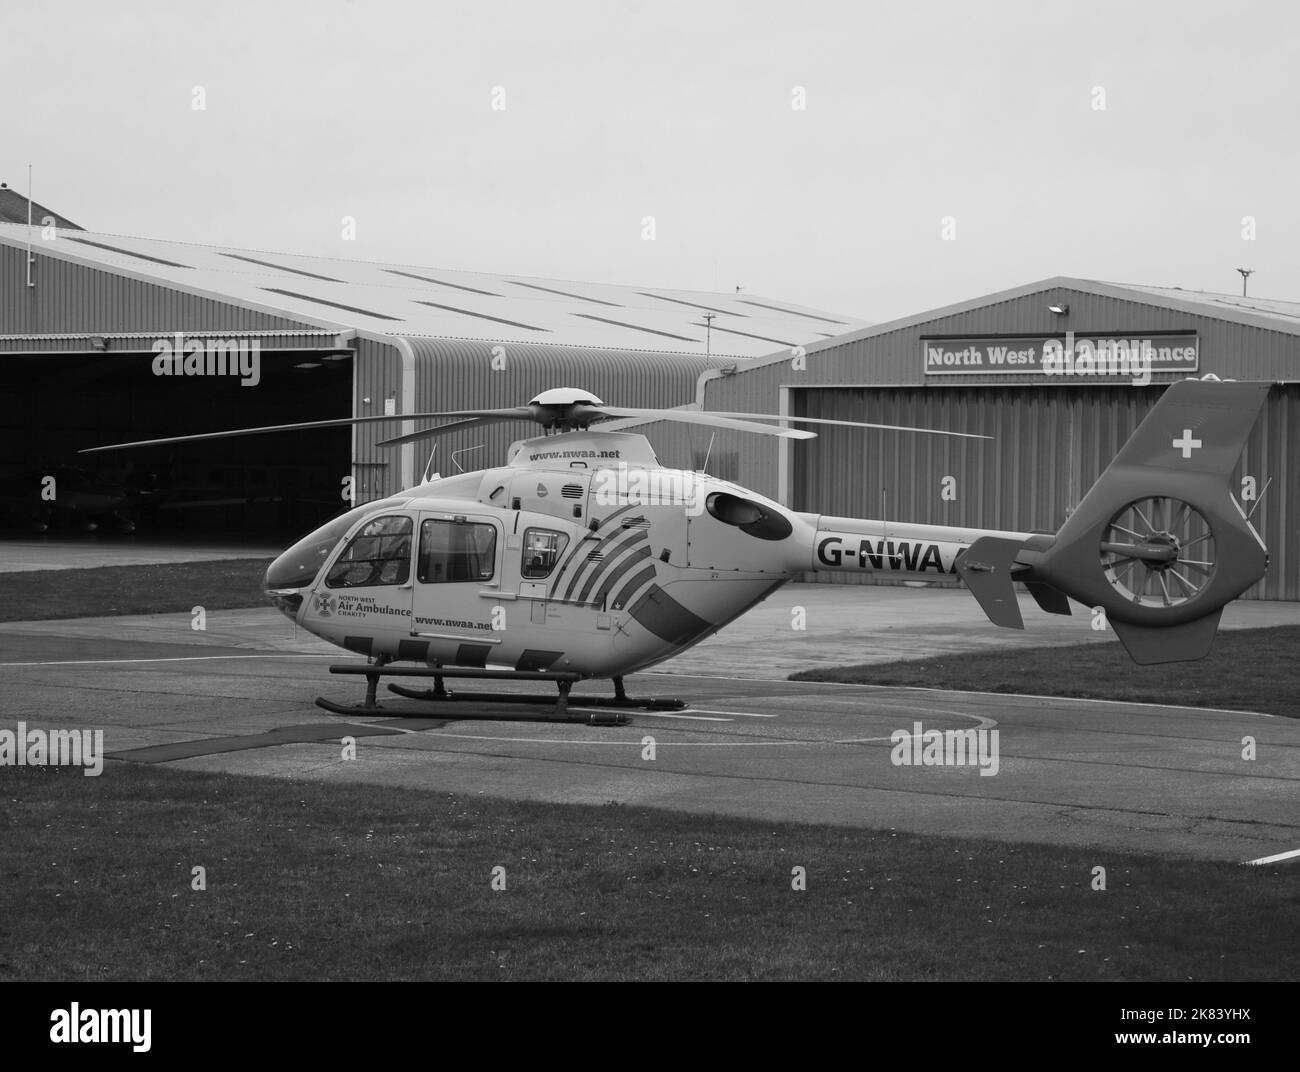 North west air ambulance helicopter Black and White Stock Photos ...